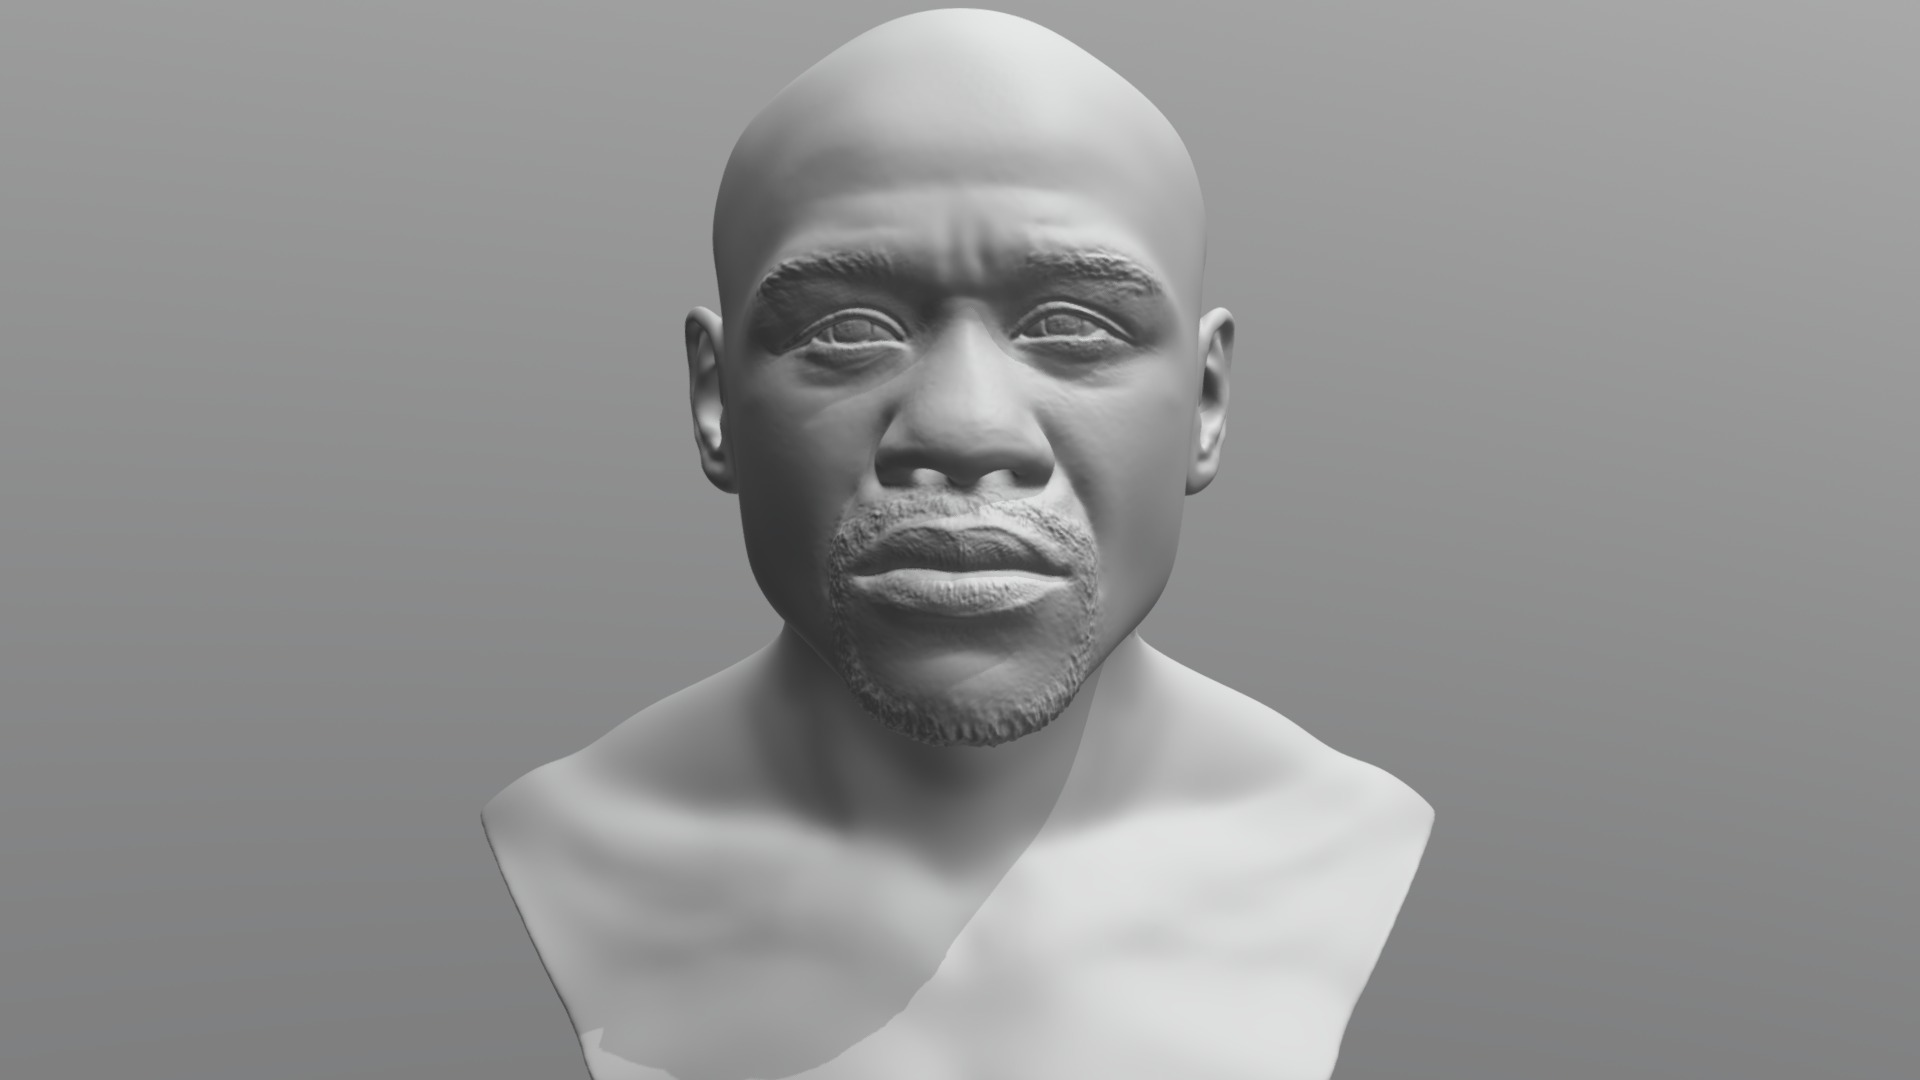 3D model Floyd Mayweather bust for 3D printing - This is a 3D model of the Floyd Mayweather bust for 3D printing. The 3D model is about a man with a beard.